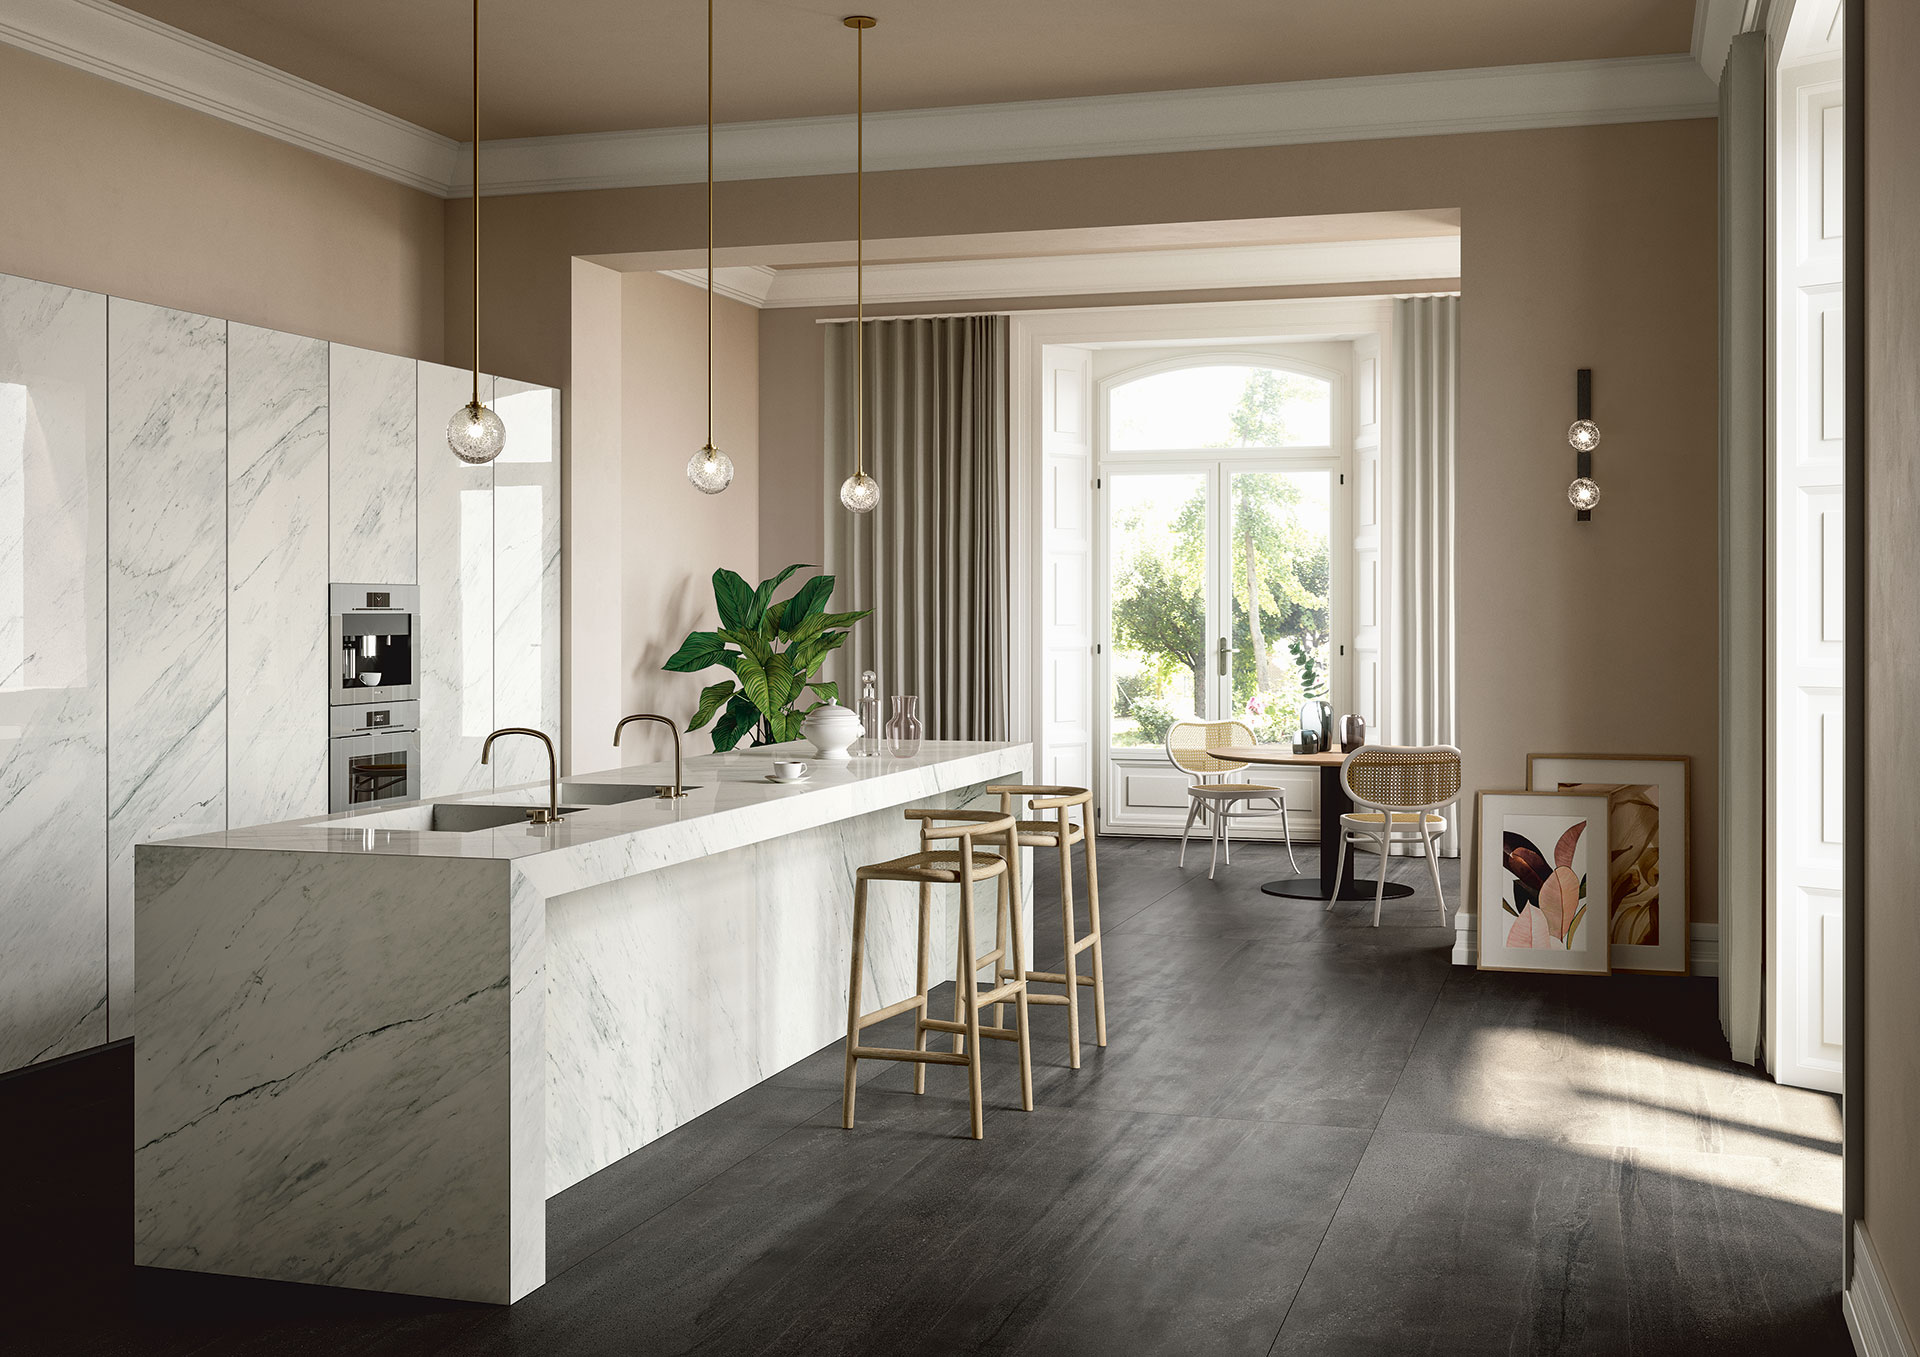 Sapienstone The Best Surfaces For The Kitchen Countertop In 2019